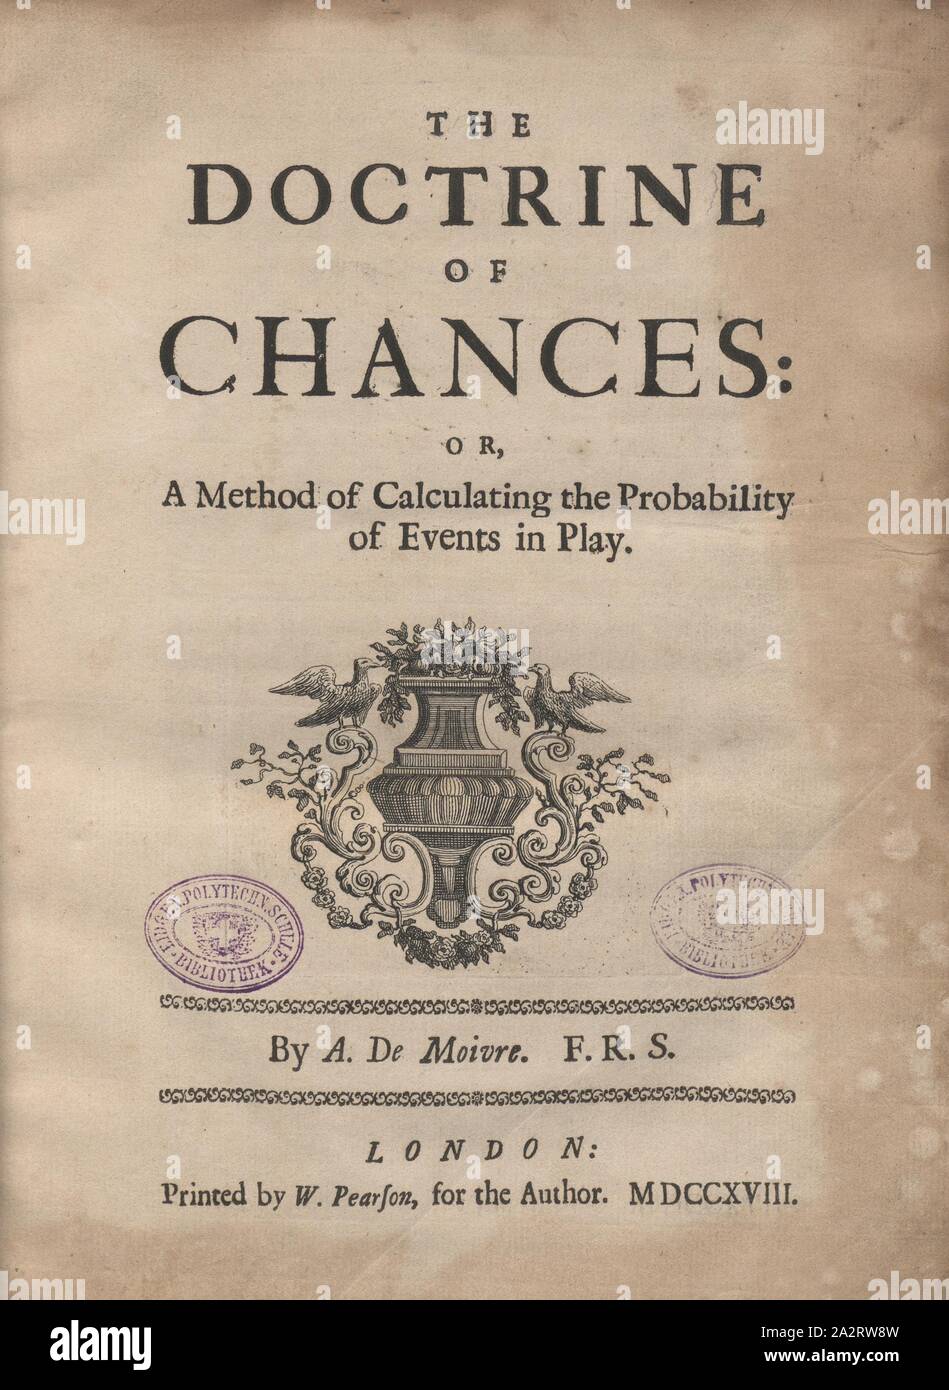 Title page from Abraham de Moivre's 'The Doctrine of Chances ...', Title page from Abraham de Moivre's 'The Doctrine of Chances ...' from the 18th century, title page, 1718, Abraham de Moivre: The Doctrine of Chances or a Method of Calculating the Probability of Events in Play. London: printed by W. Pearson for the author, 1718 Stock Photo